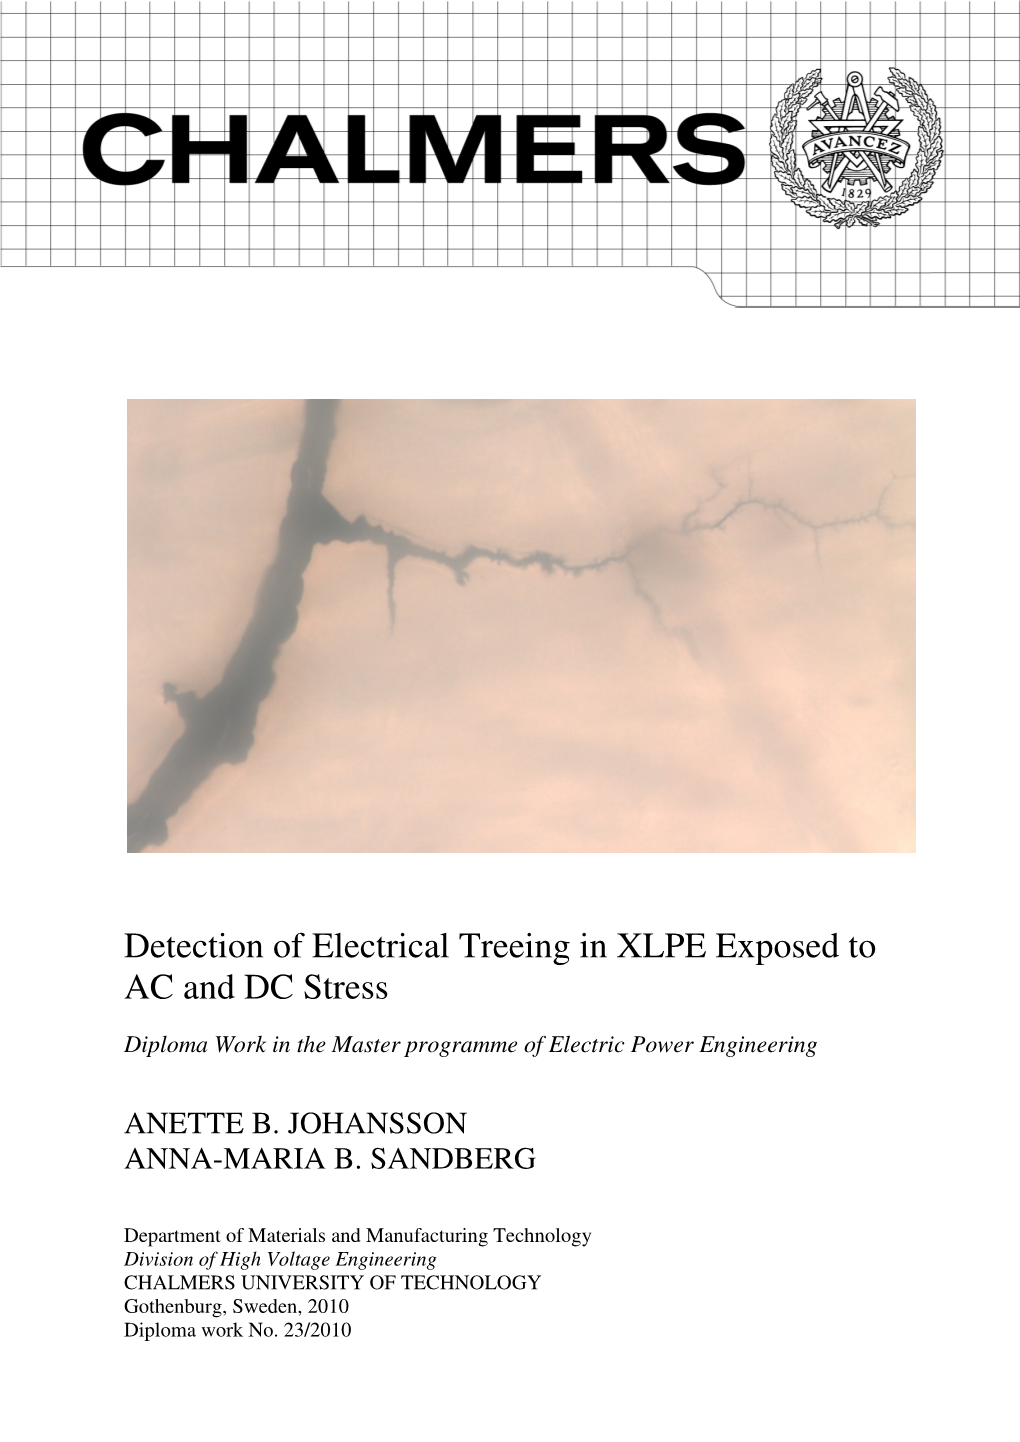 Detection of Electrical Treeing in XLPE Exposed to AC and DC Stress